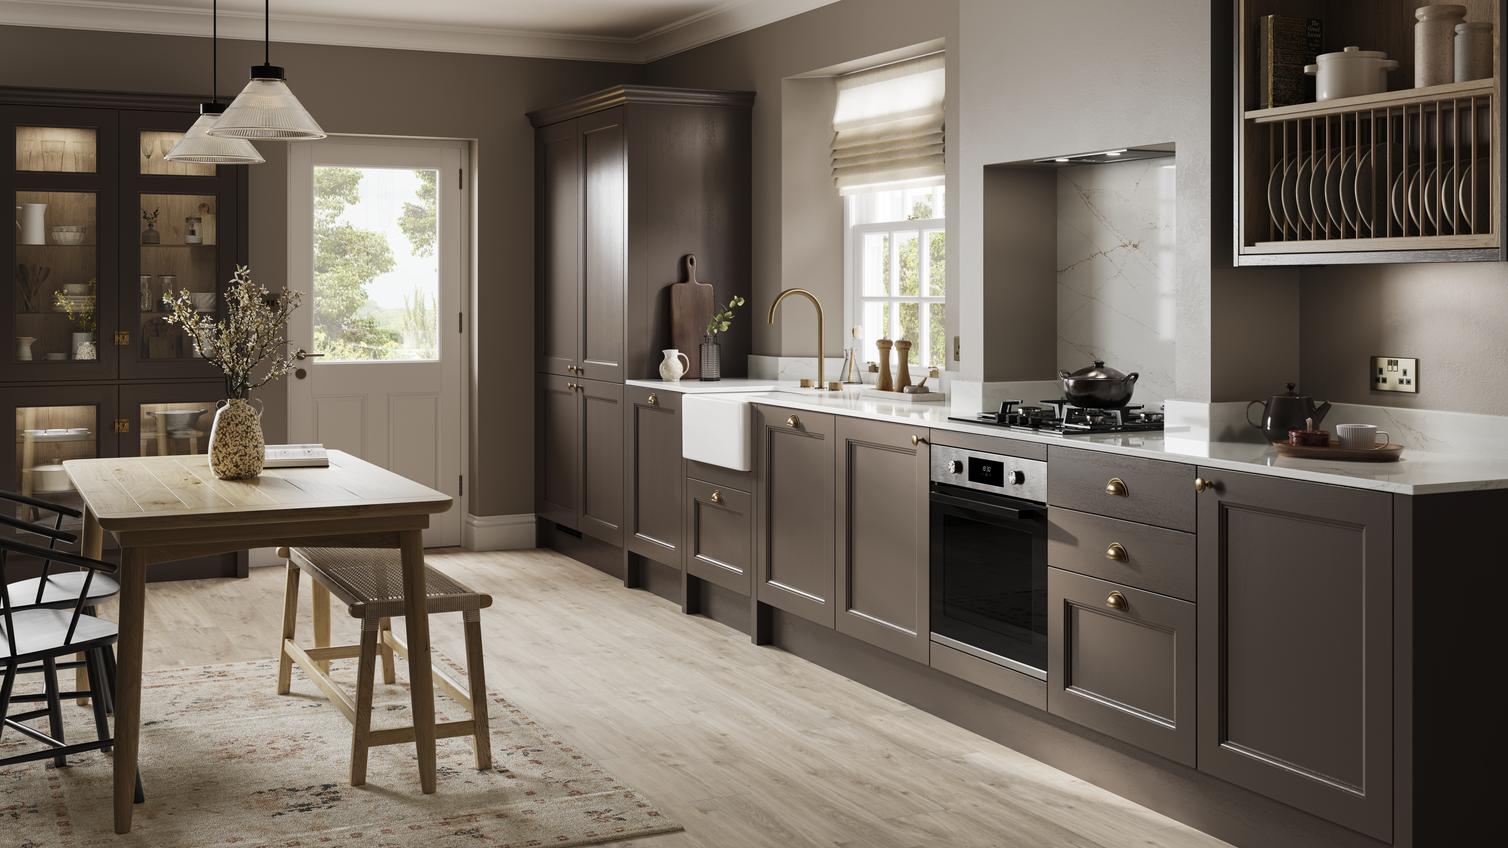 A truffle-brown shaker kitchen in a single wall layout. It has a glass dresser cabinet, white worktops, and wood flooring.